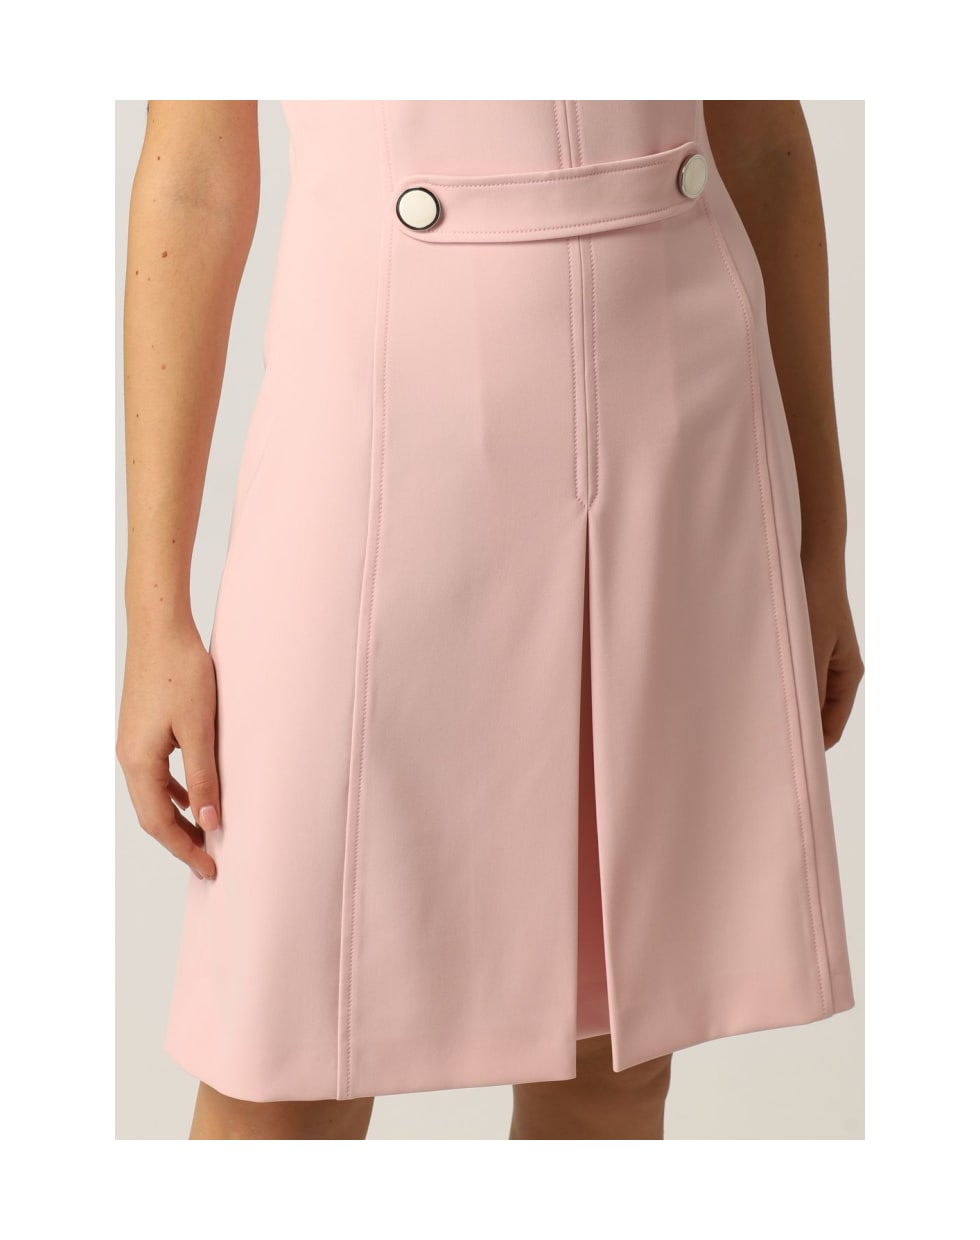 Boutique Moschino Dress Boutique Moschino Dress With Martingale - Pink